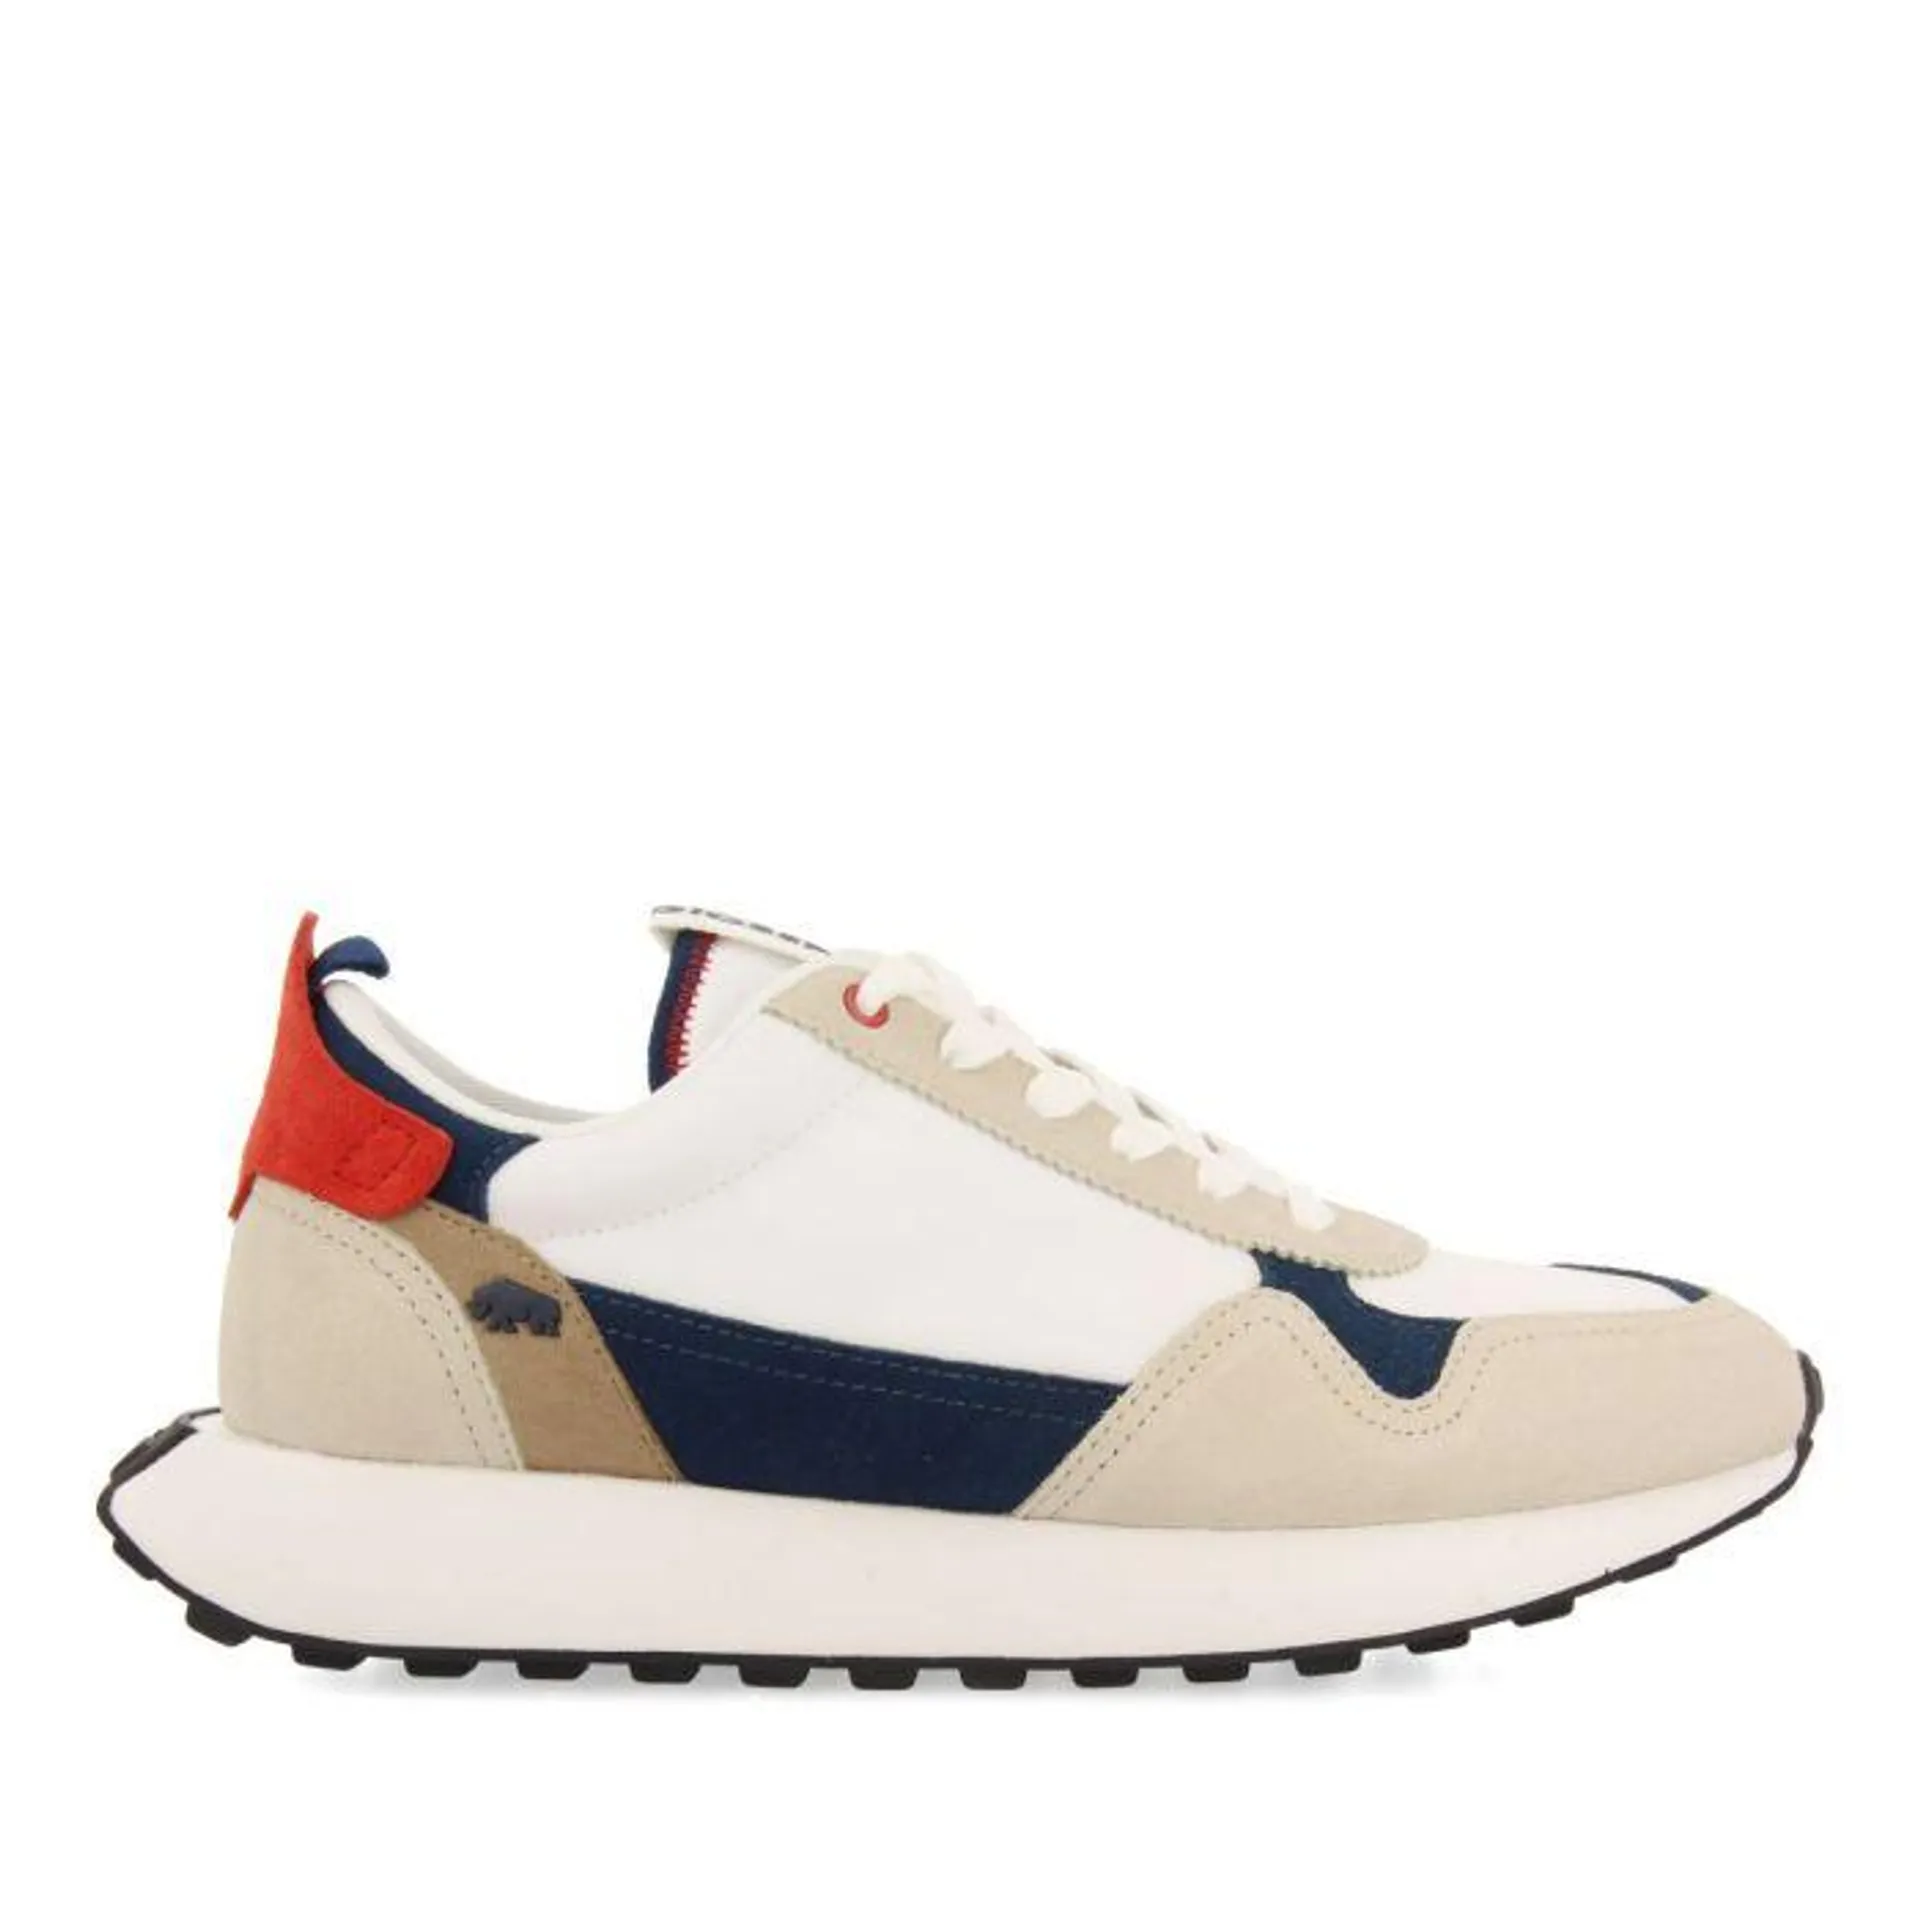 WHITE SNEAKERS WITH COLOR CONTRASTS FOR MEN ZENNOR